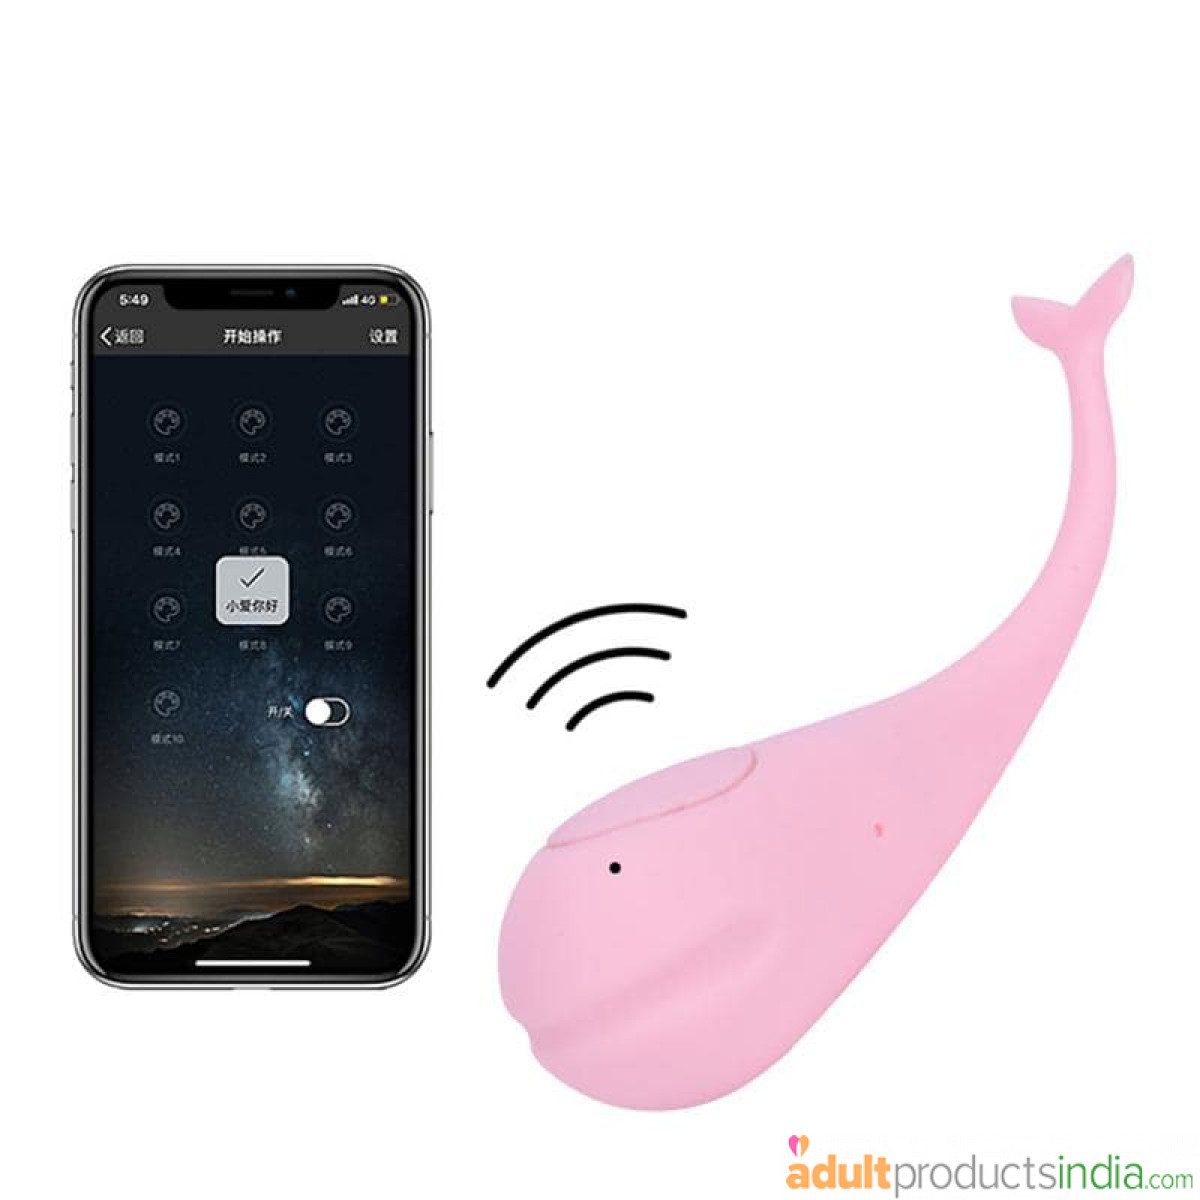 Big Whale Vibrator With Mobile App Control